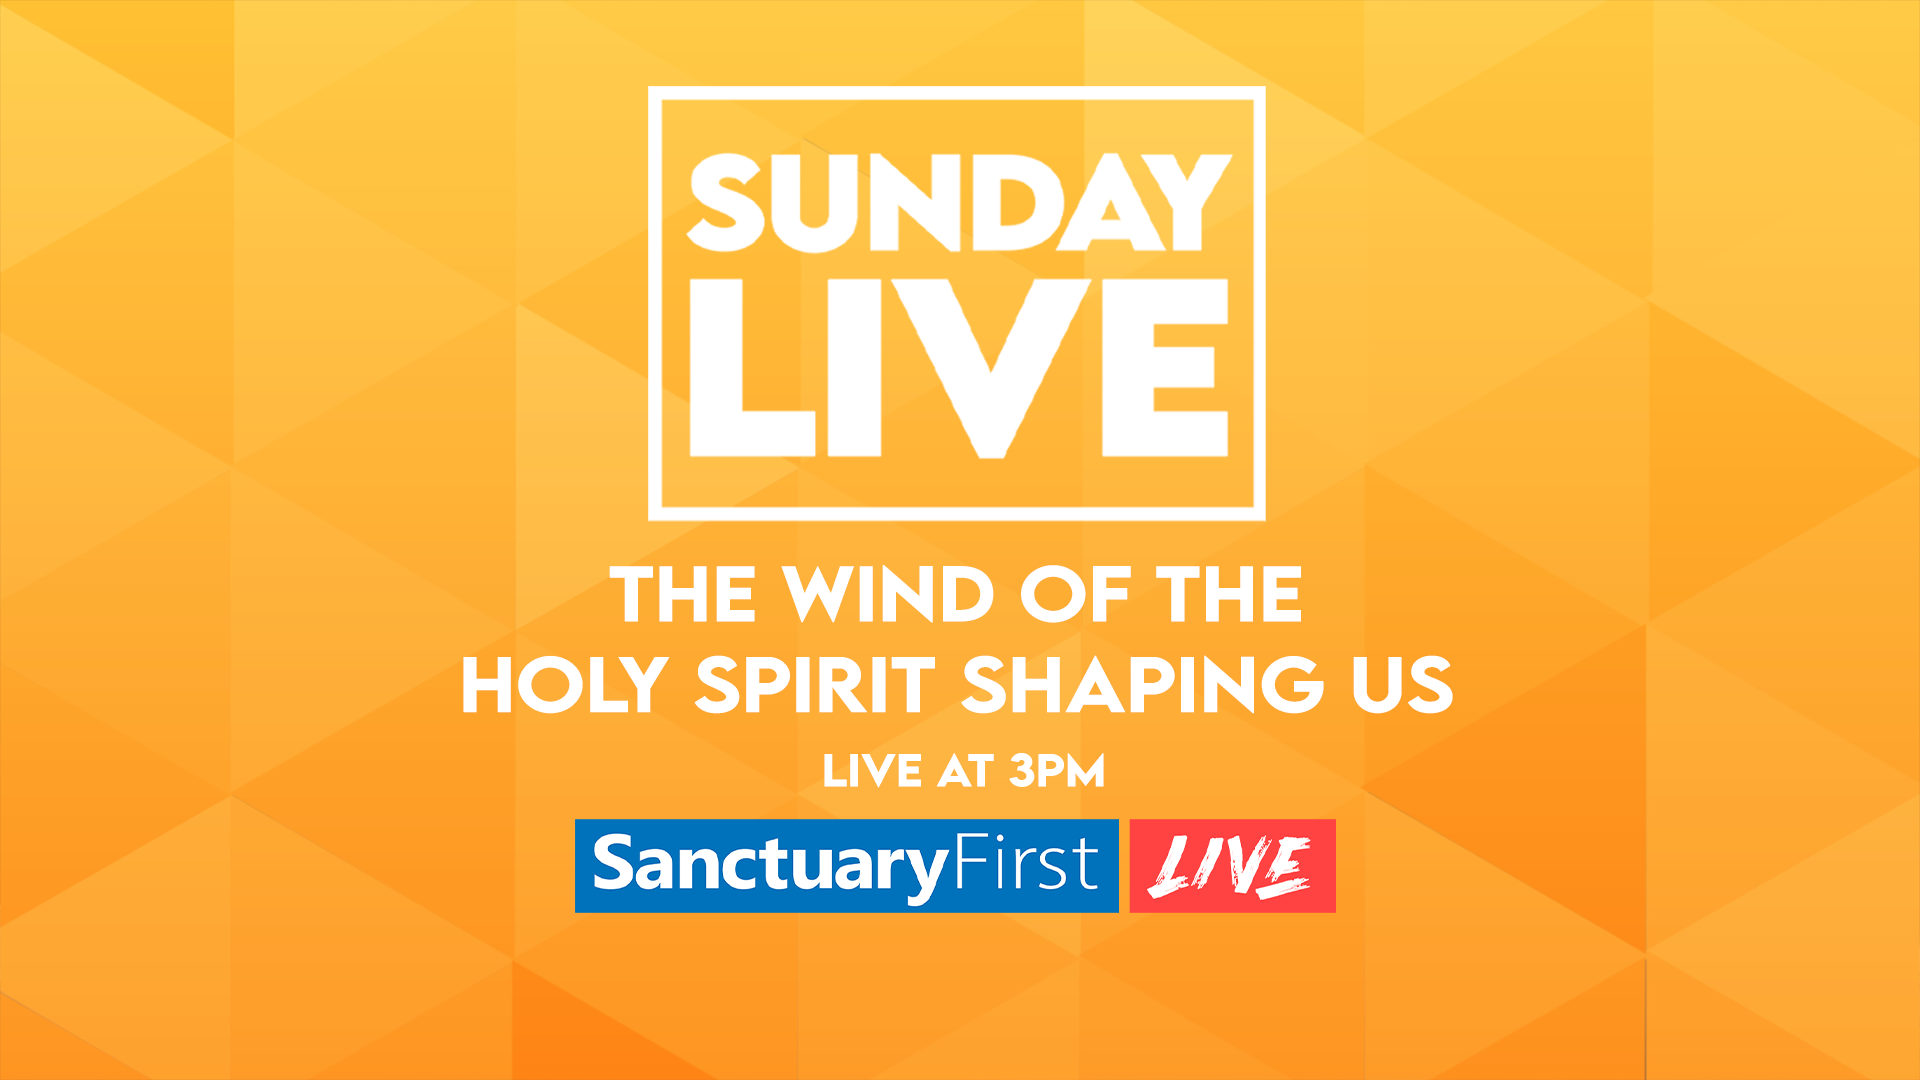 Sunday Live: The Wind of the Holy Spirit shaping us